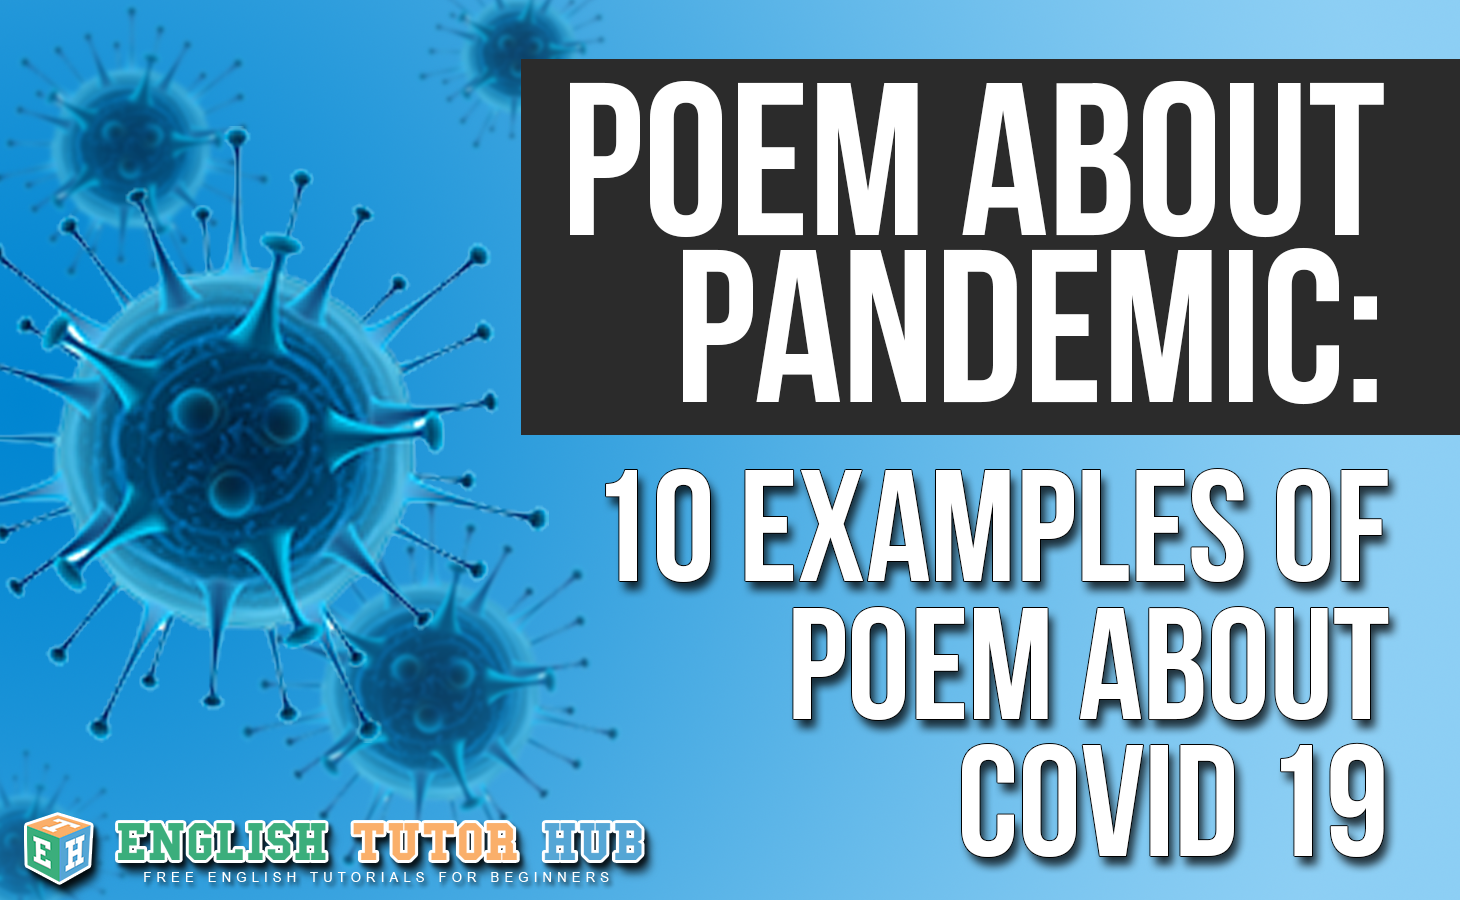 POEM ABOUT PANDEMIC - 10 EXAMPLES OF POEM ABOUT COVID 19